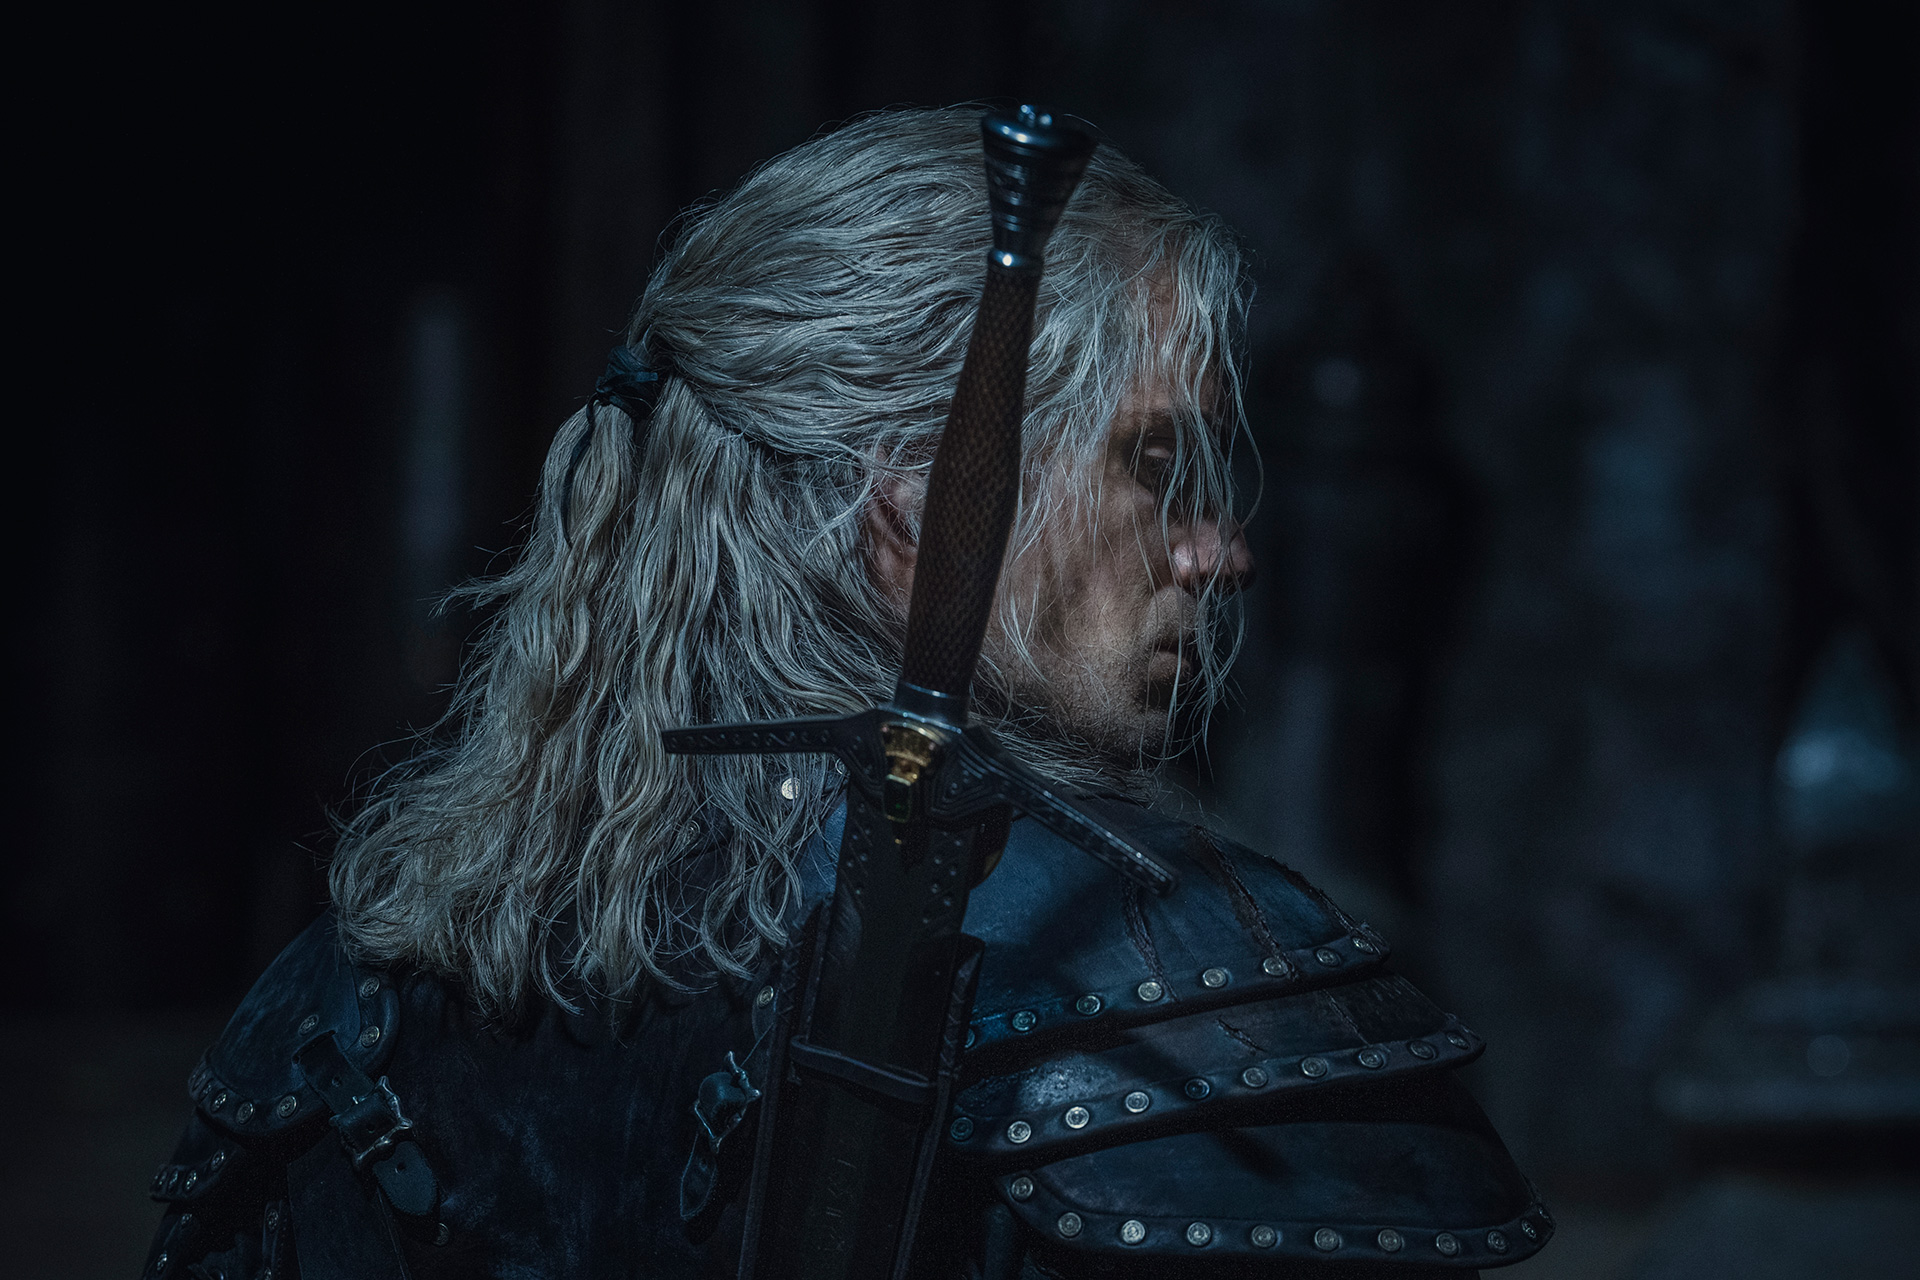 Netflix’s ‘The Witcher’ plans contain season 3 and a teenagers’ sequence